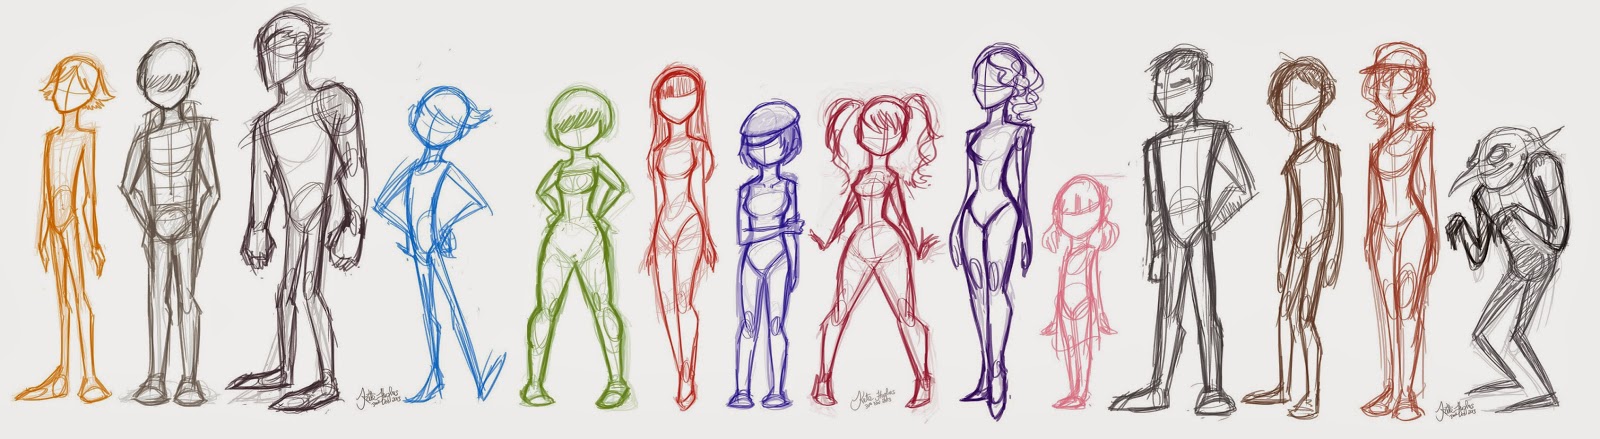 Kate's Arts: Bodytype Chart Sketches